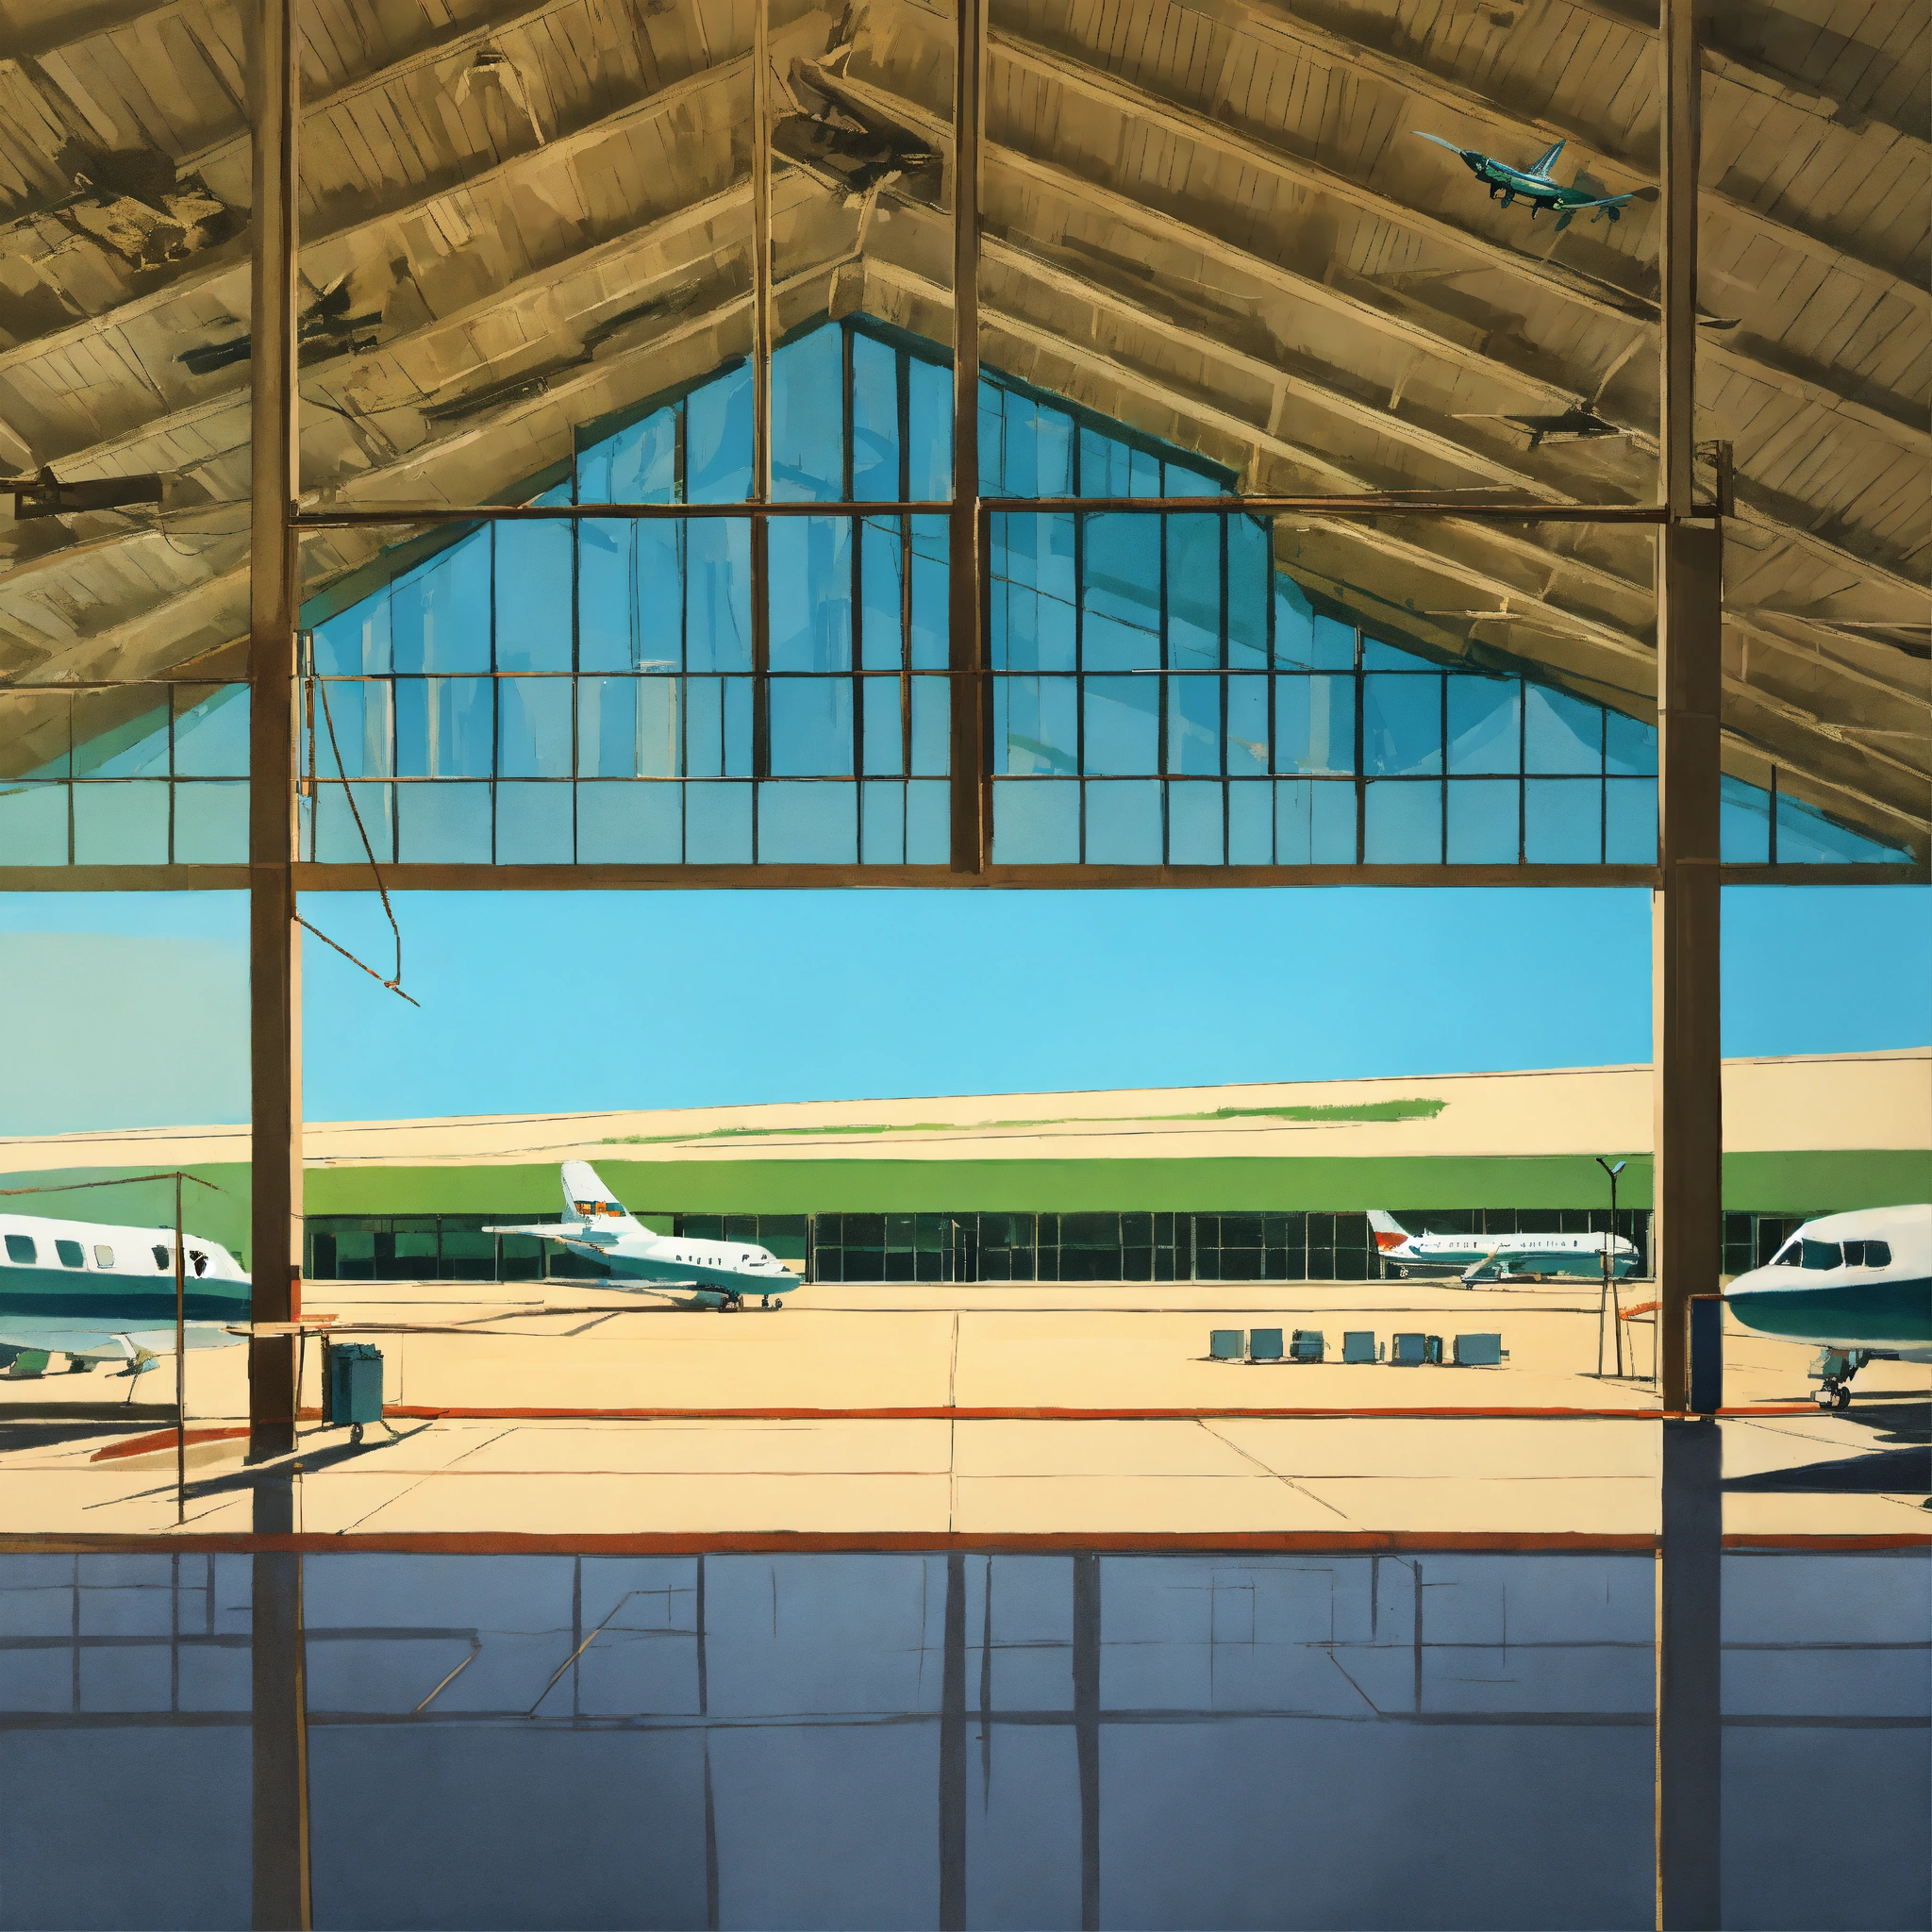 Lexica - Abandoned airport terminal, in the style of Alex Katz and ...